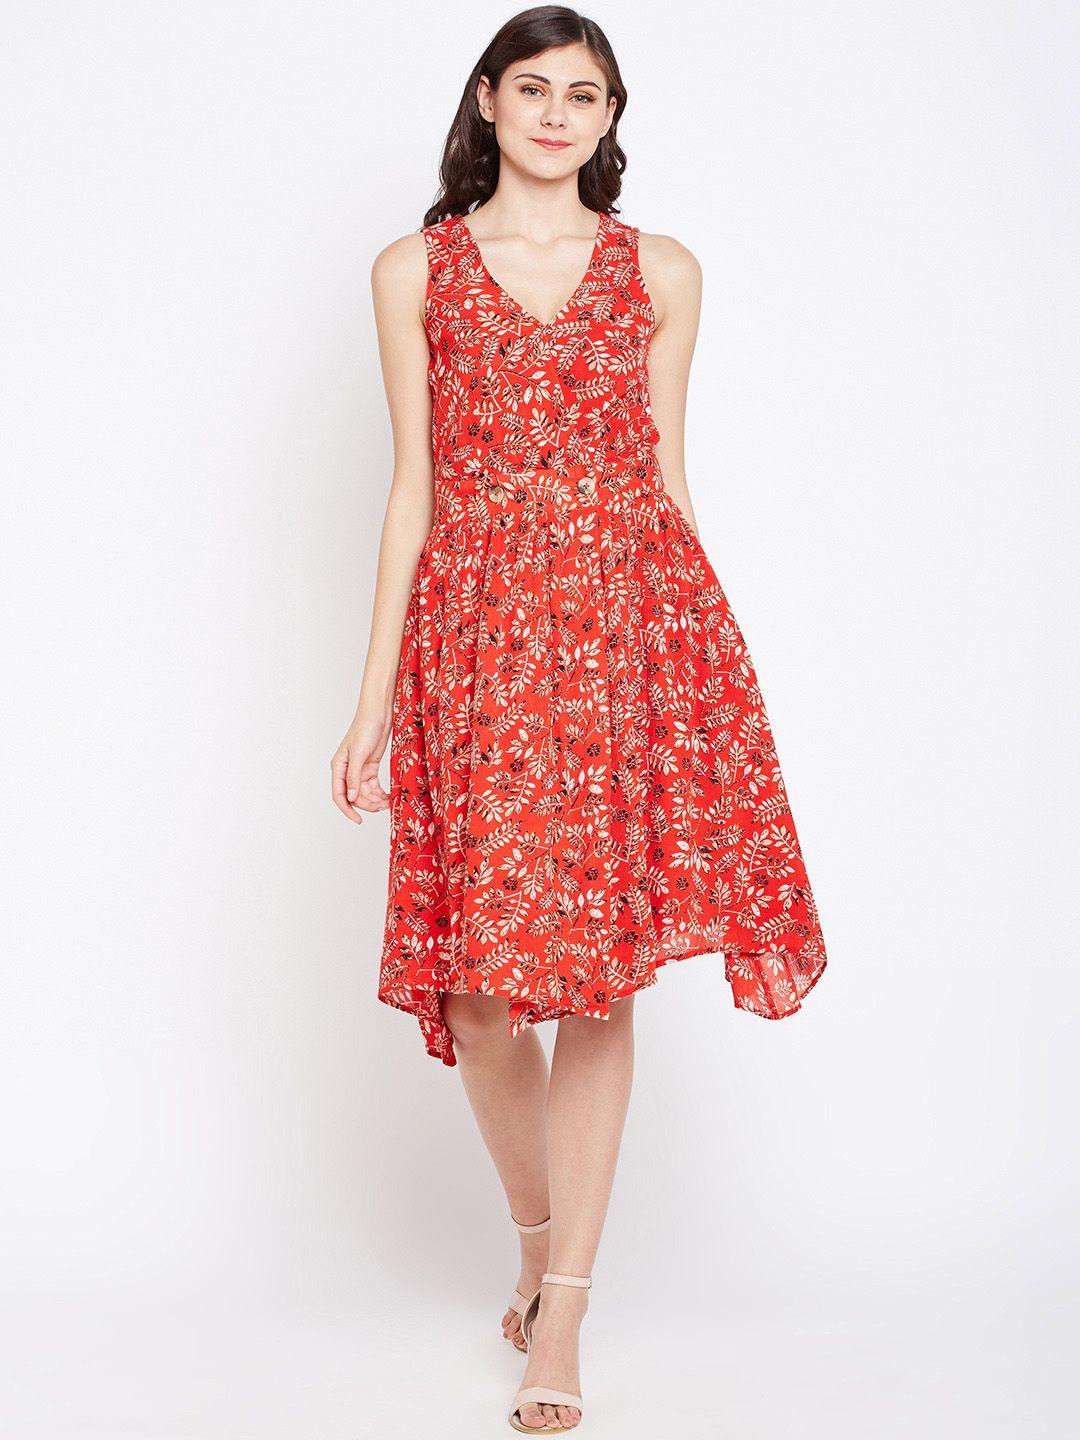 oxolloxo women coral red & beige printed a-line dress